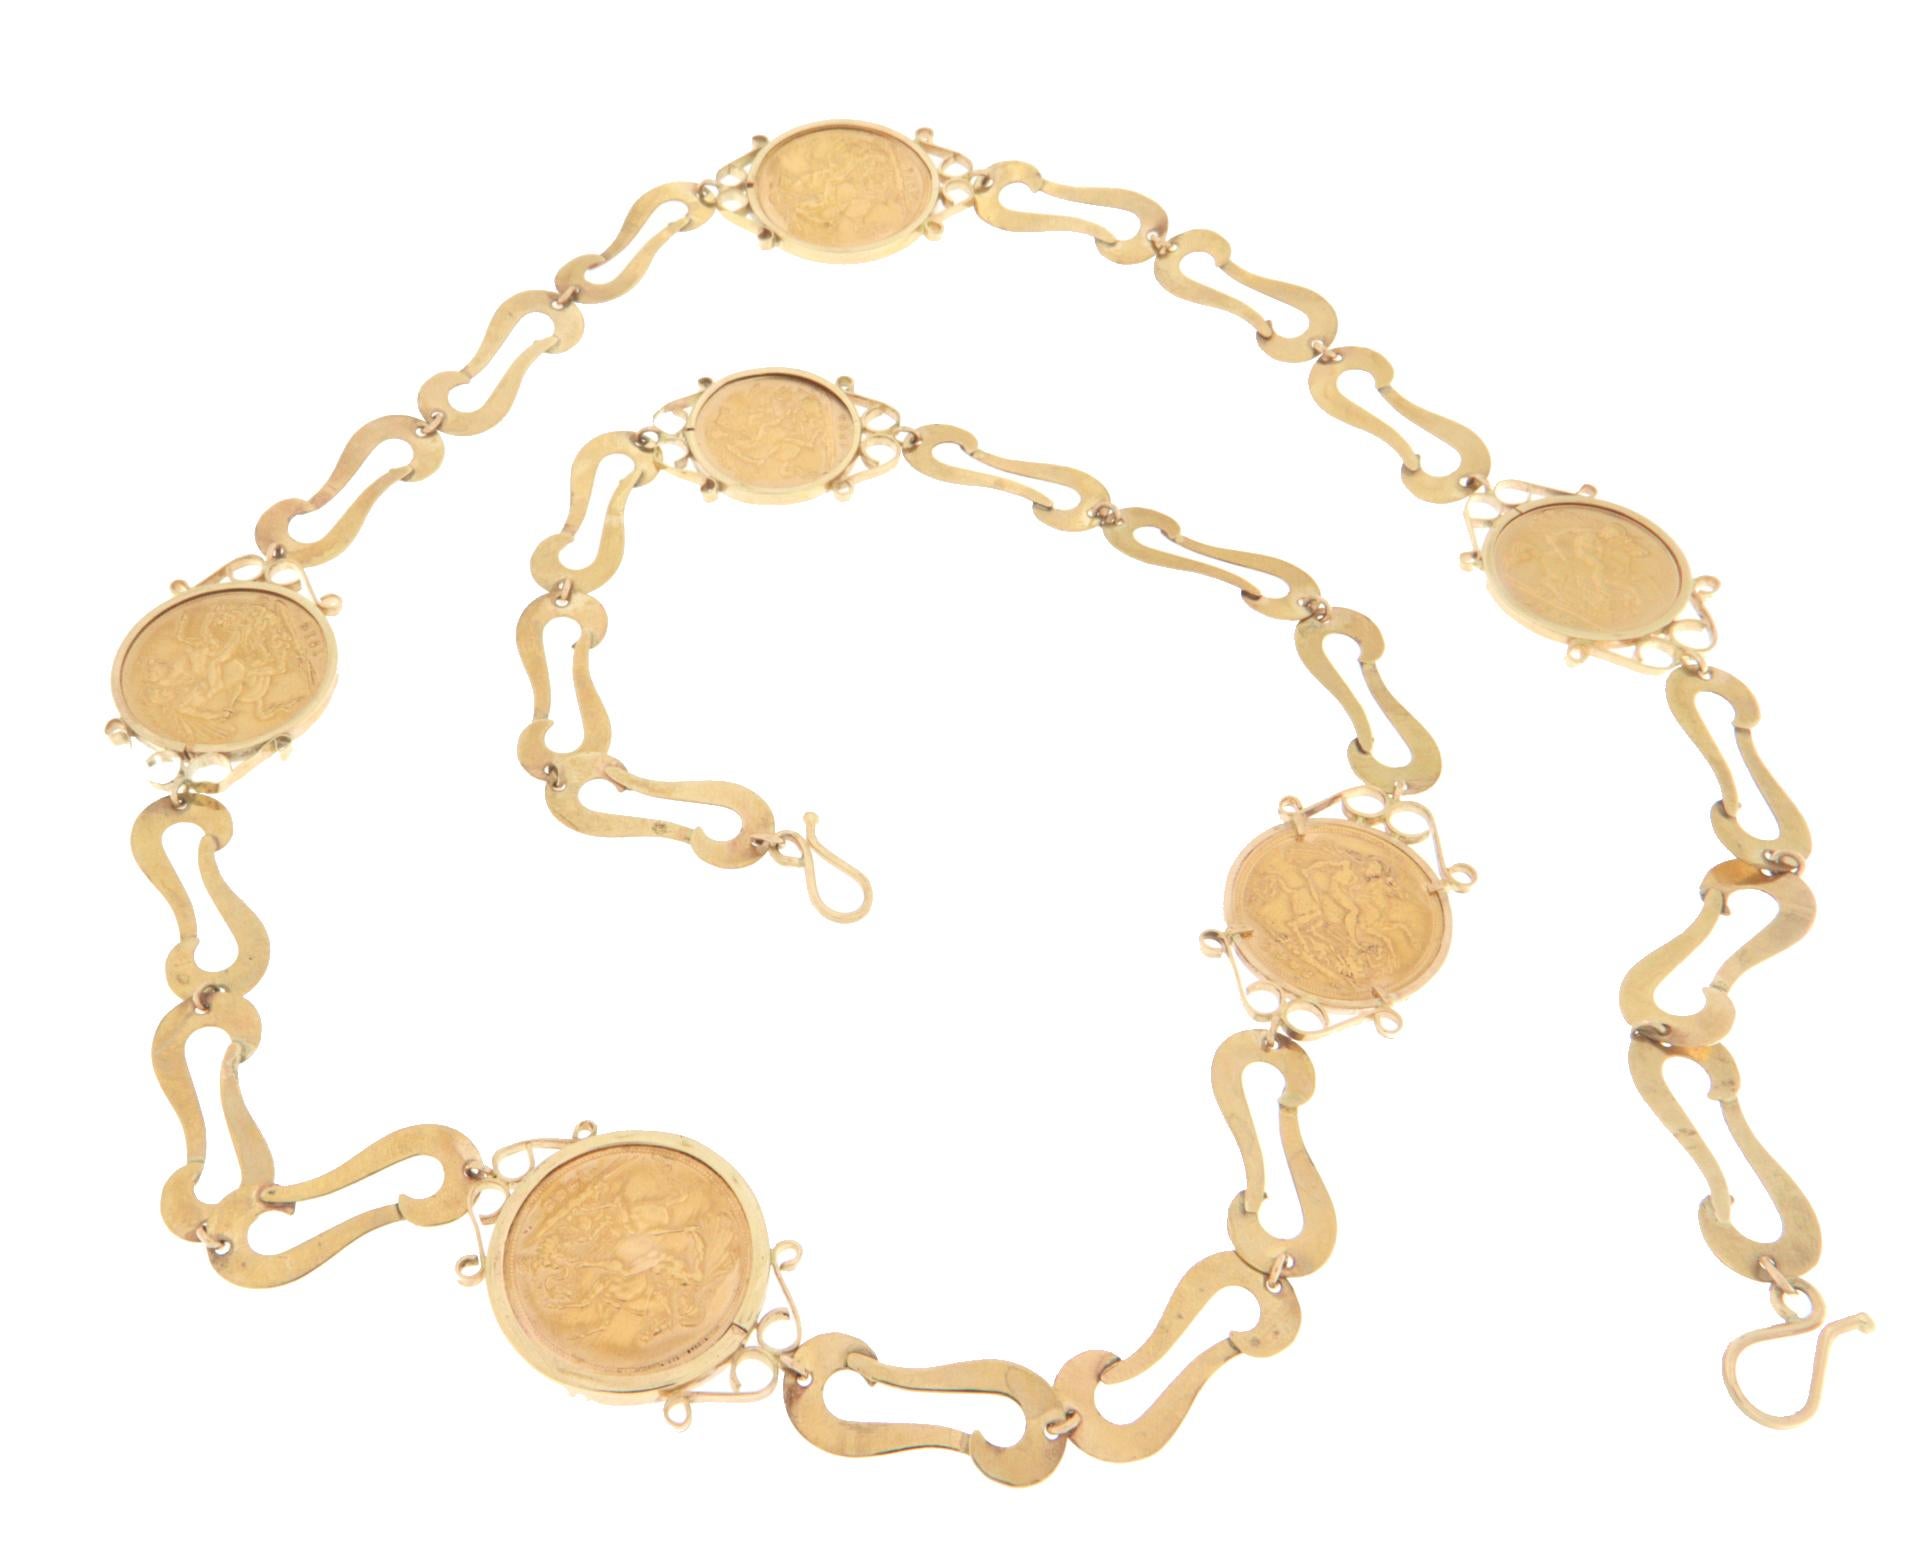 Fantastic ancient 9 karat yellow gold necklace mounted with antique british coins in 22 karat yellow gold
Chain is in 9 karat gold
Coins are in 22 karat gold

Necklace total weight 57.60 grams
Necklace length 35 (necklace close)